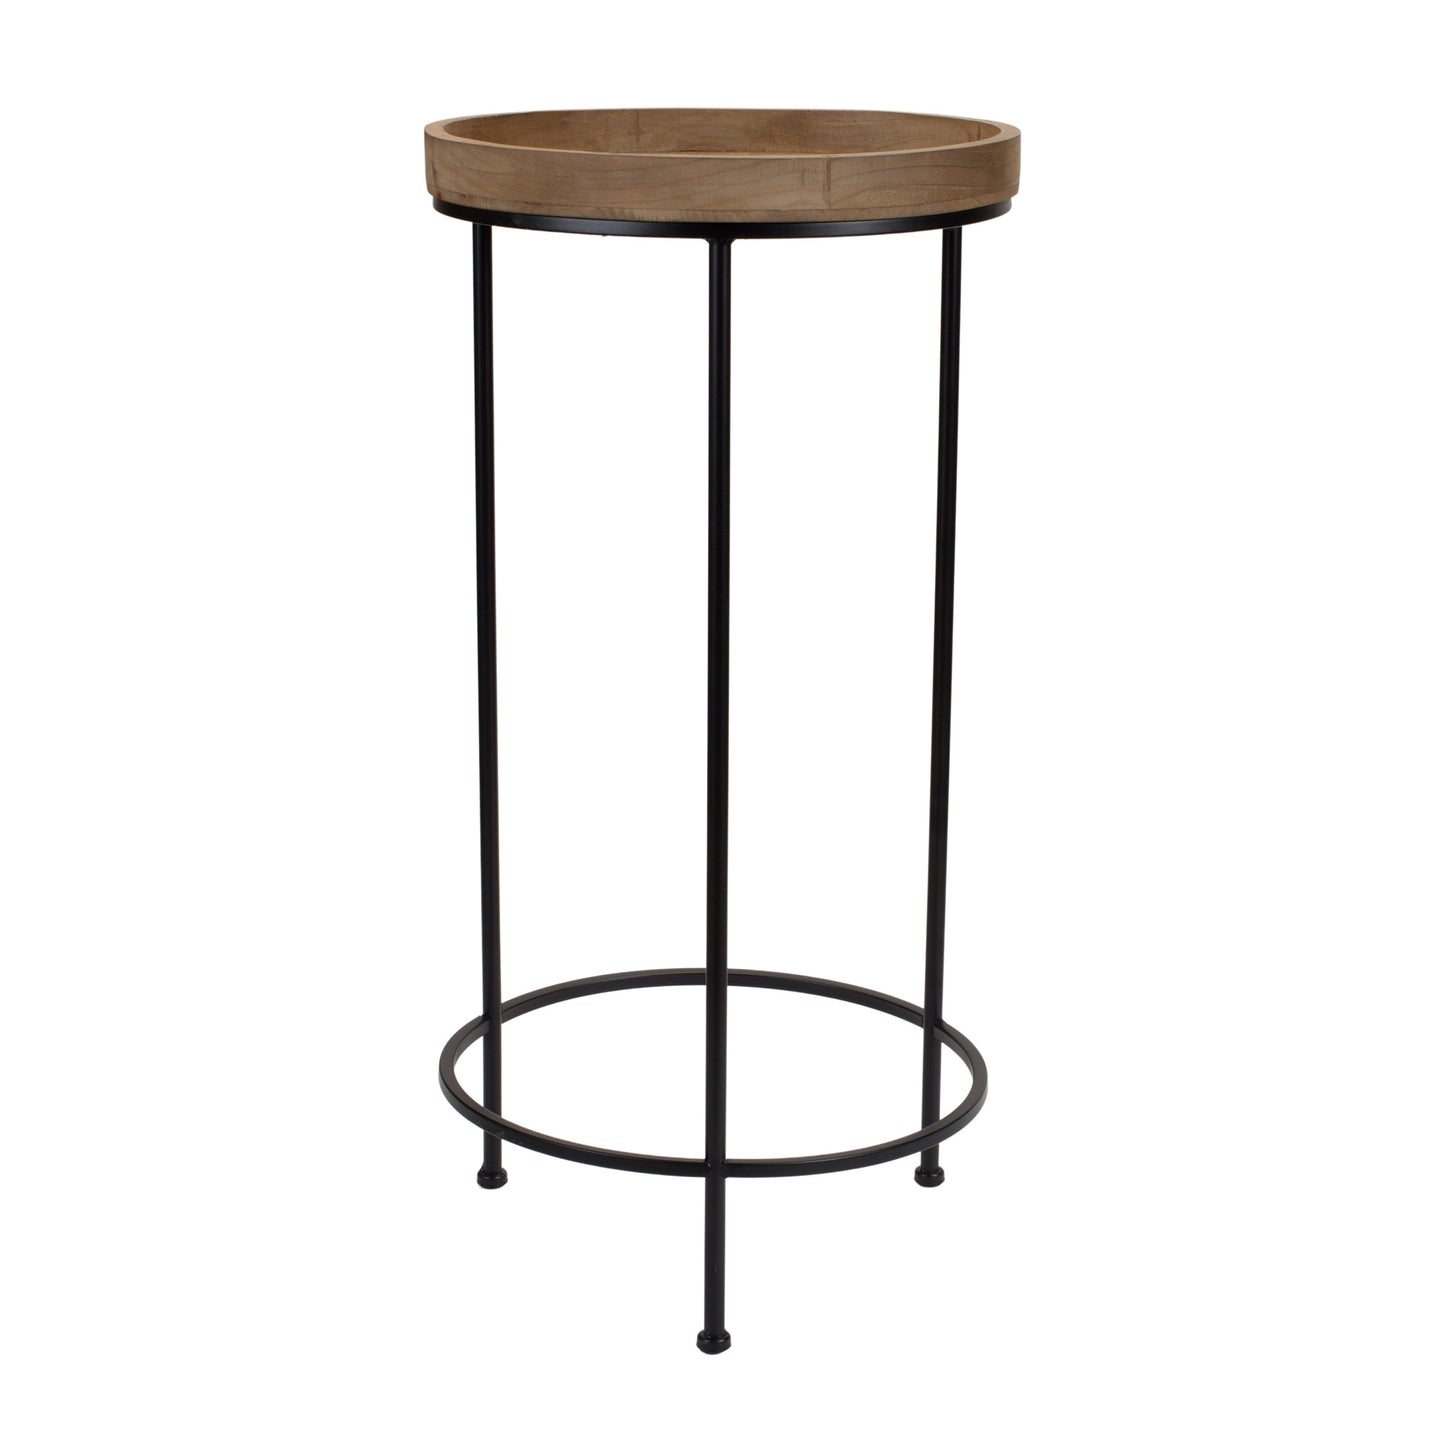 Set Of Three 14" Black And Brown Solid Wood Round End Tables By Homeroots